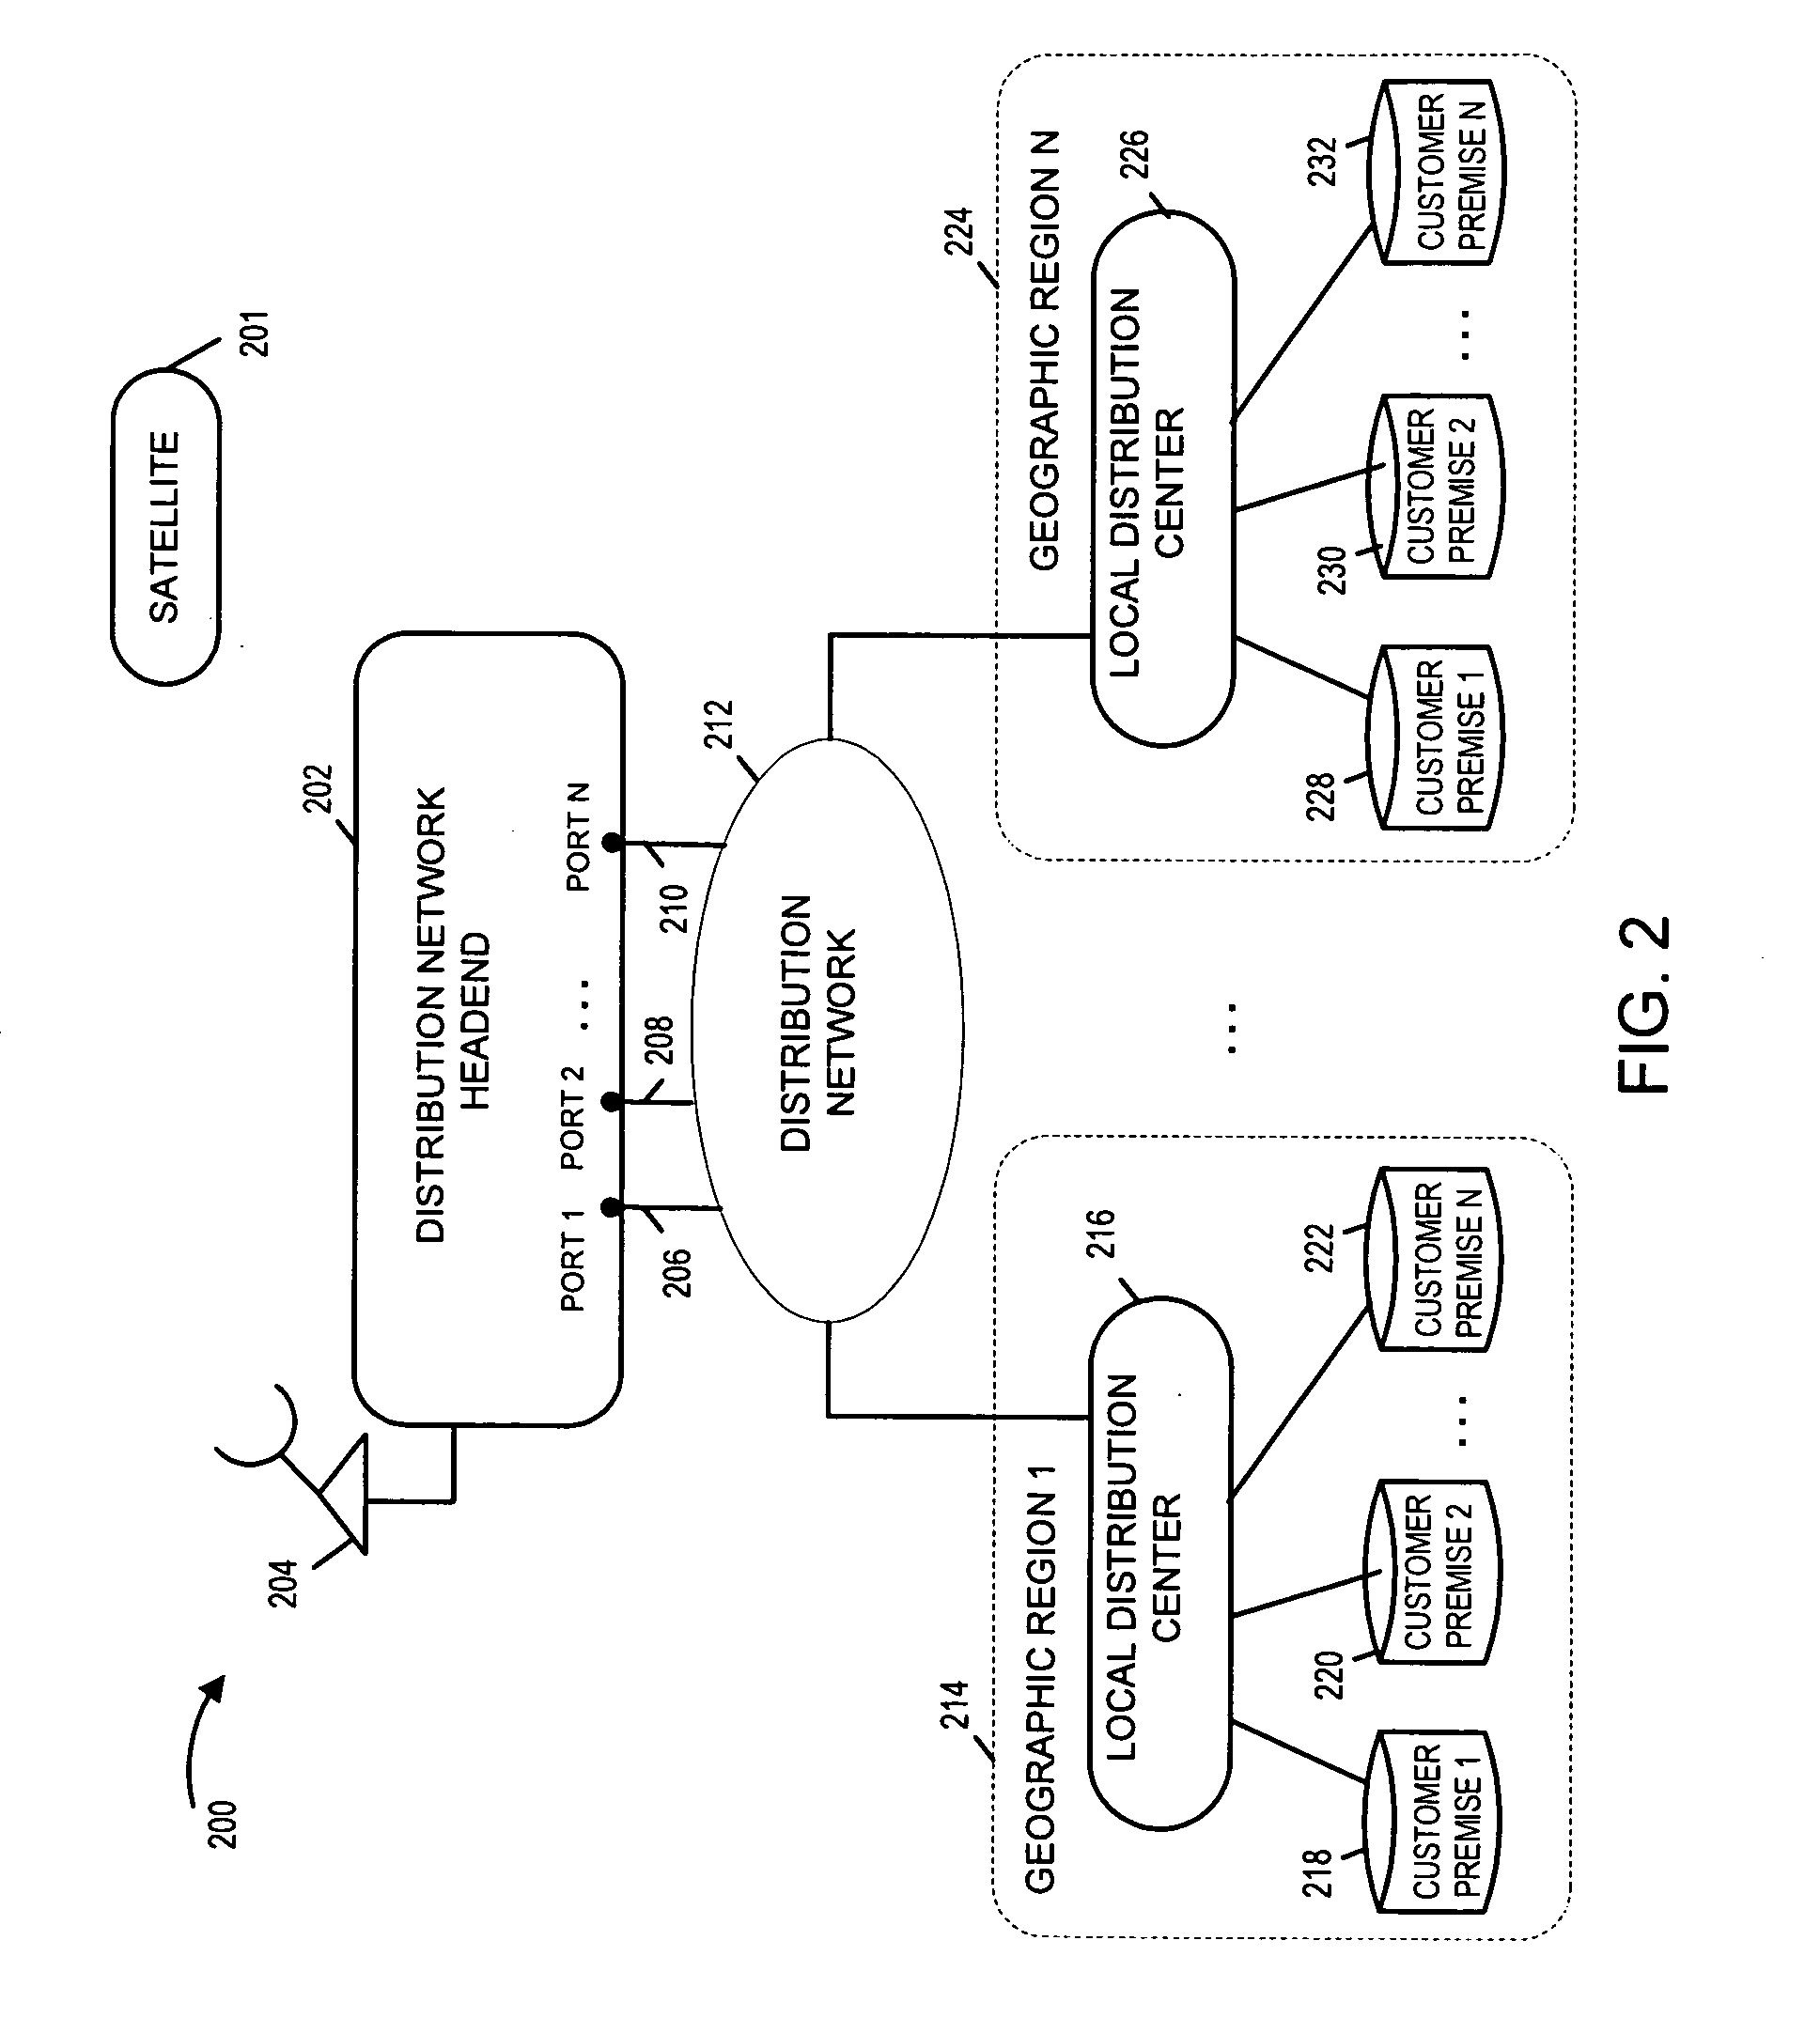 Methods and apparatus for controlling content distribution